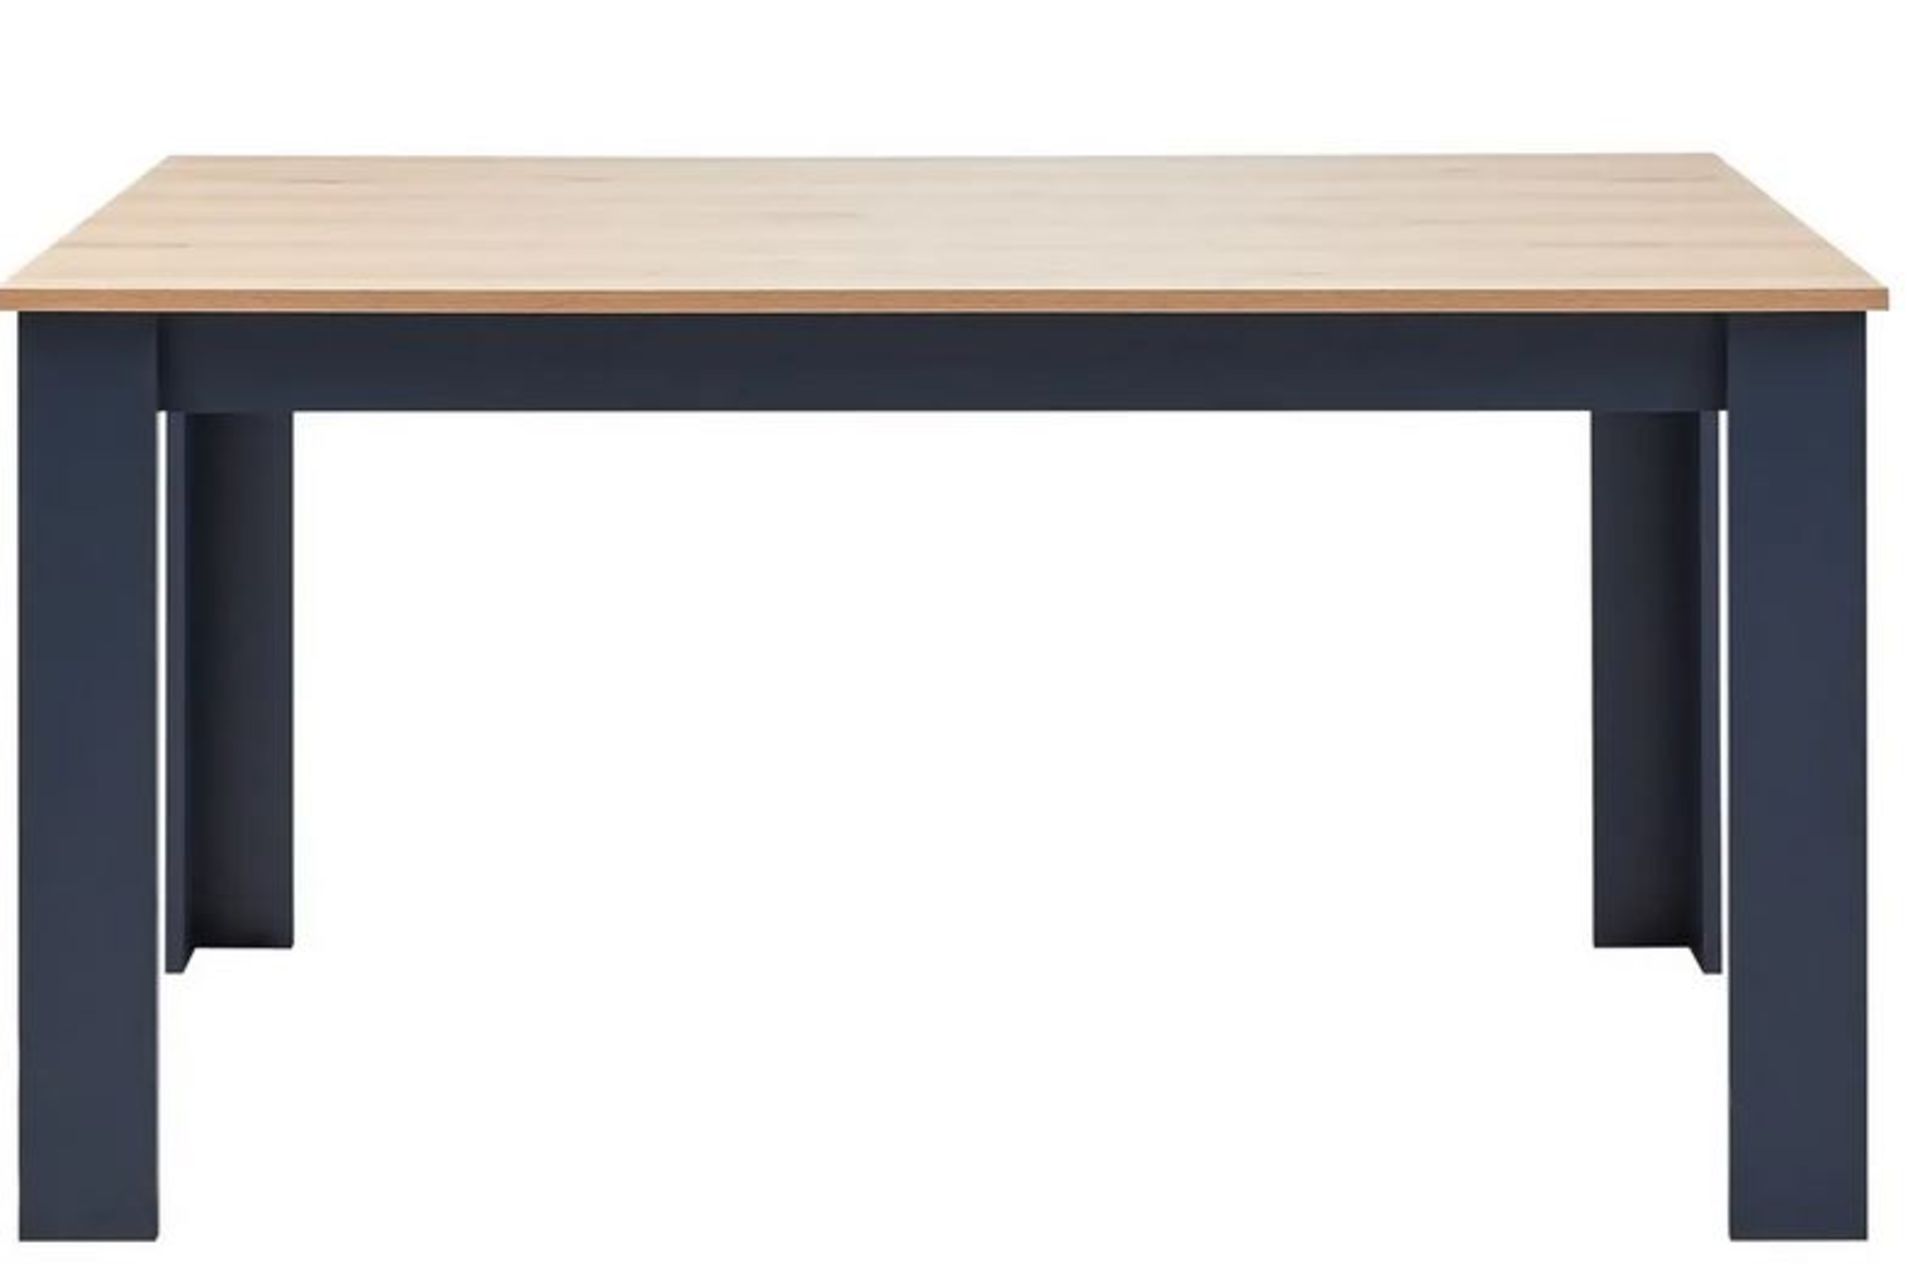 1x Marcy Dining Table Midnight. Midnight Finish With Oak Effect Top/ (H75x W150x D90cm). Unit Opene - Image 2 of 6